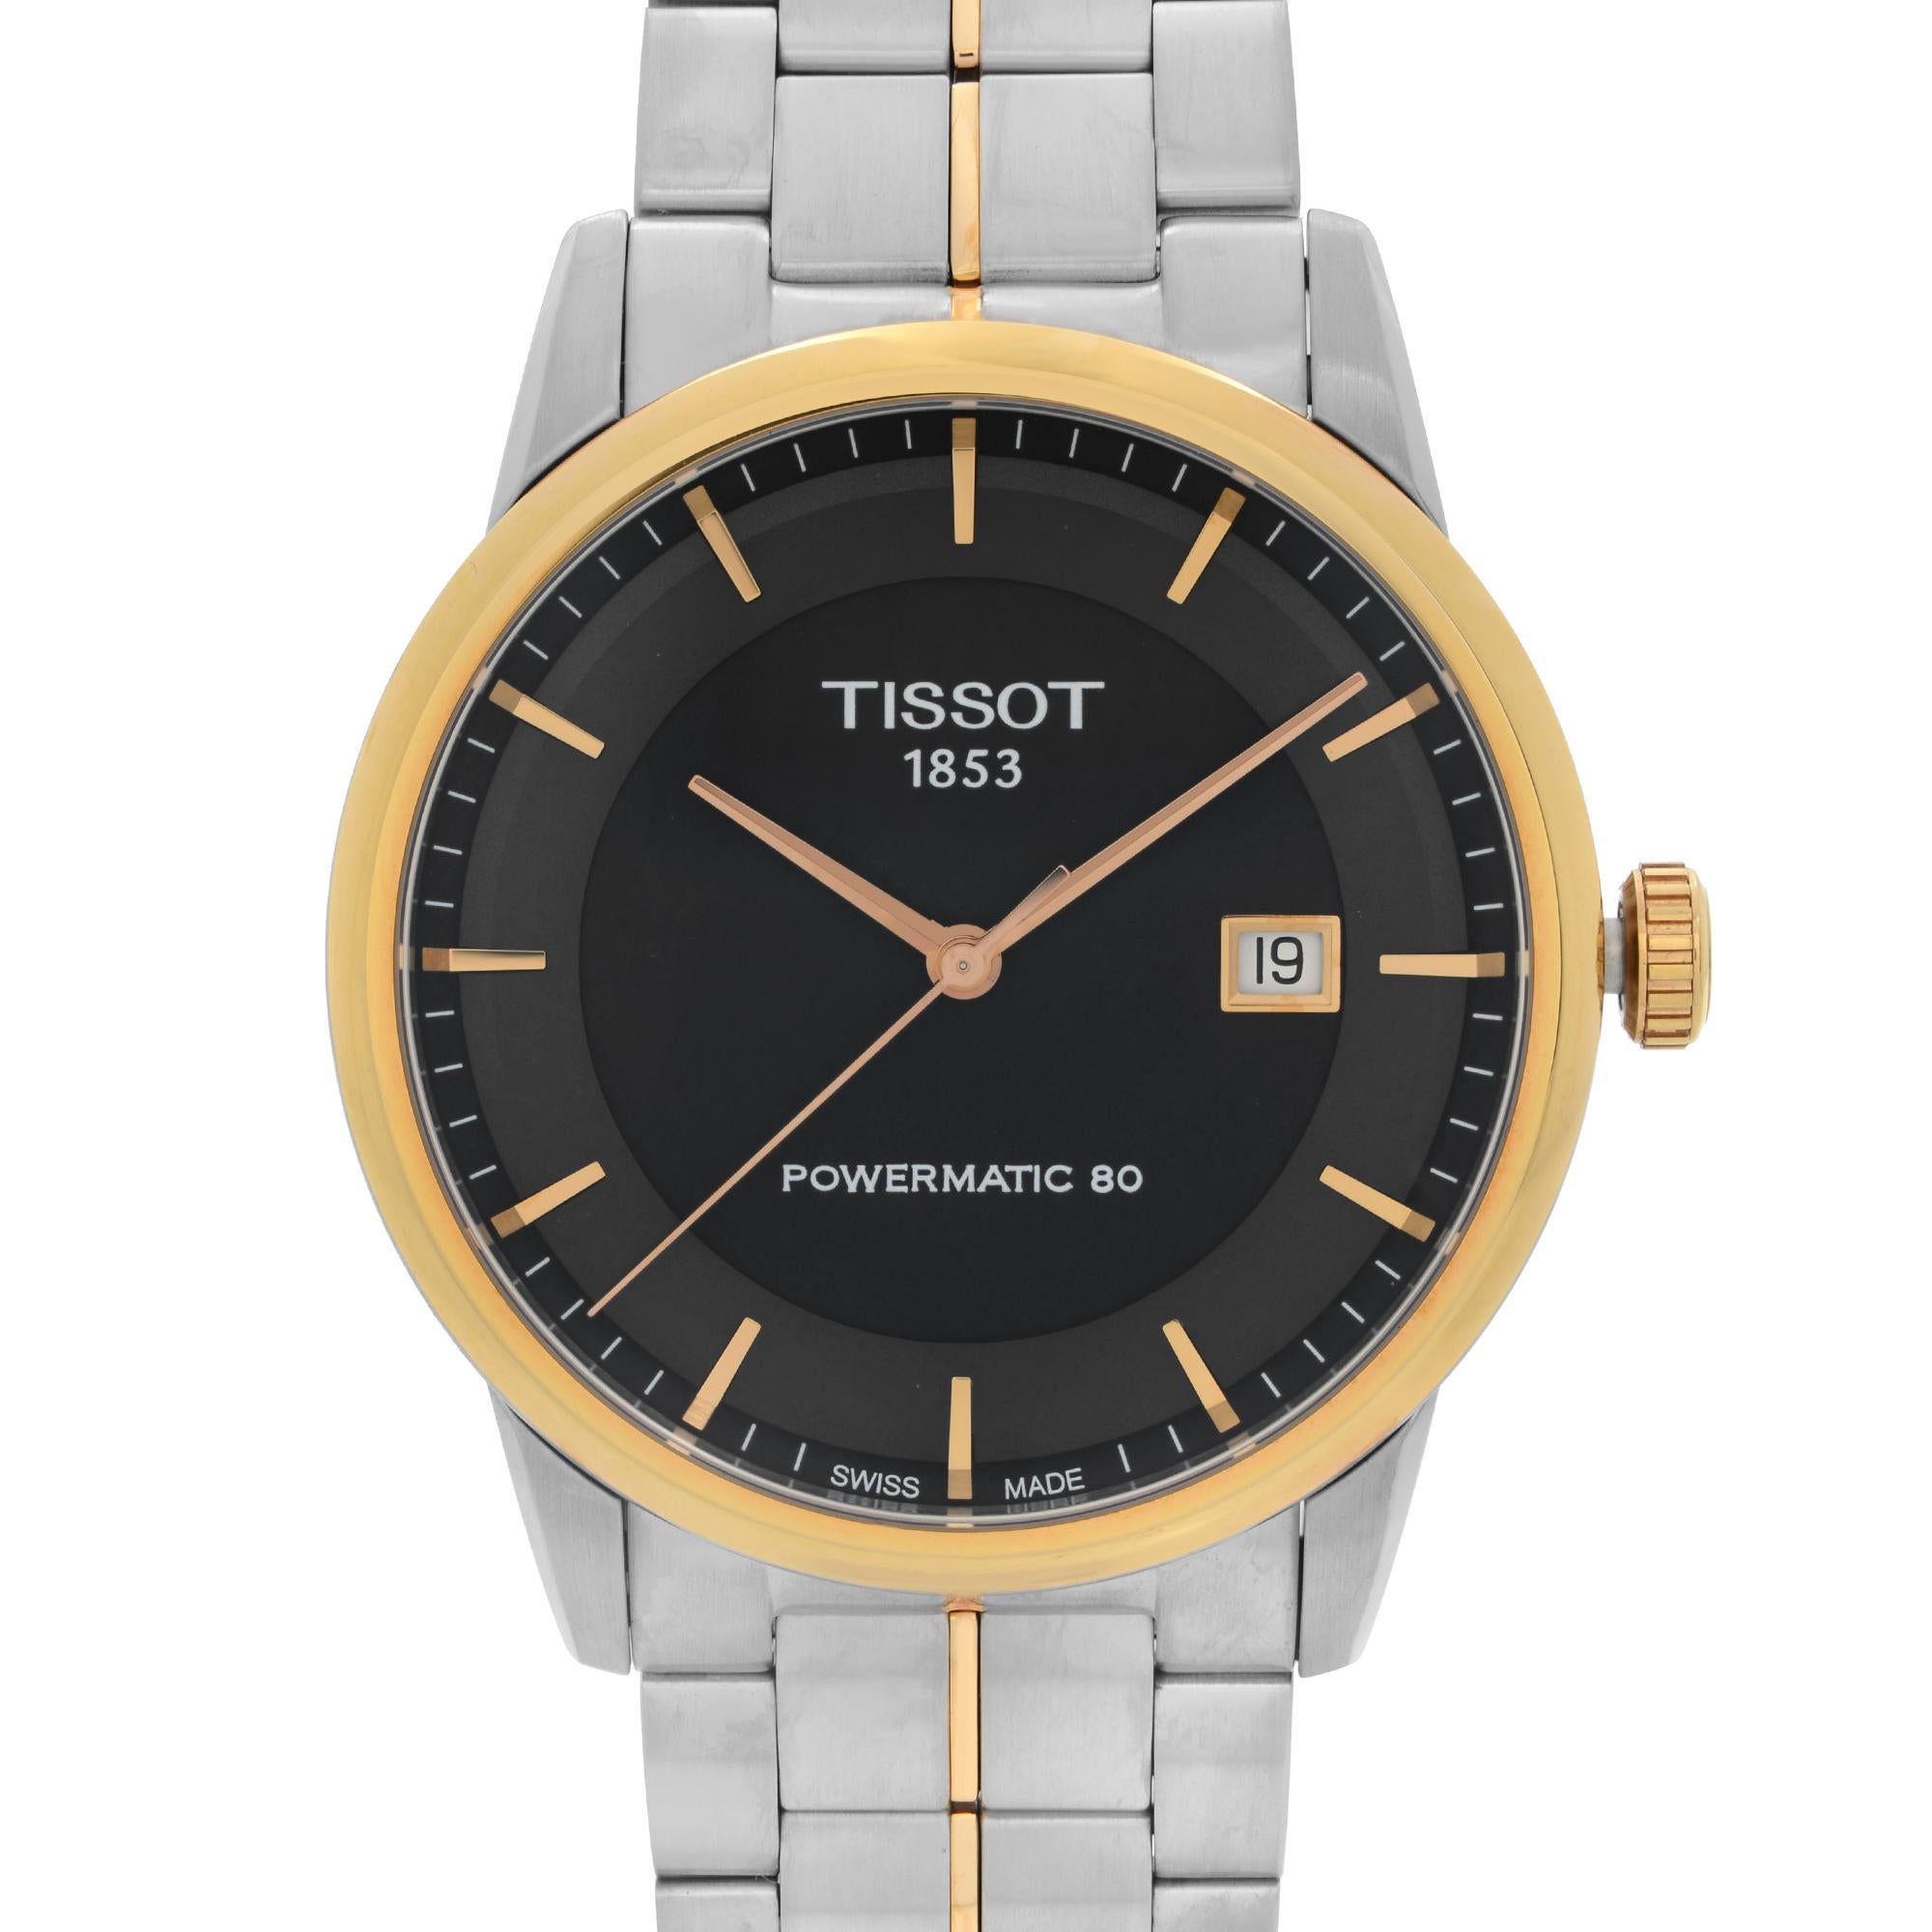 New with defect Tissot Powermatic 80 41mm Stainless Steel Black Dial Men's Automatic Watch T086.407.22.051.00. The watch has minor signs of oxidation on the hour hand due to aging. This timepiece is powered by Mechanical (automatic) movement with